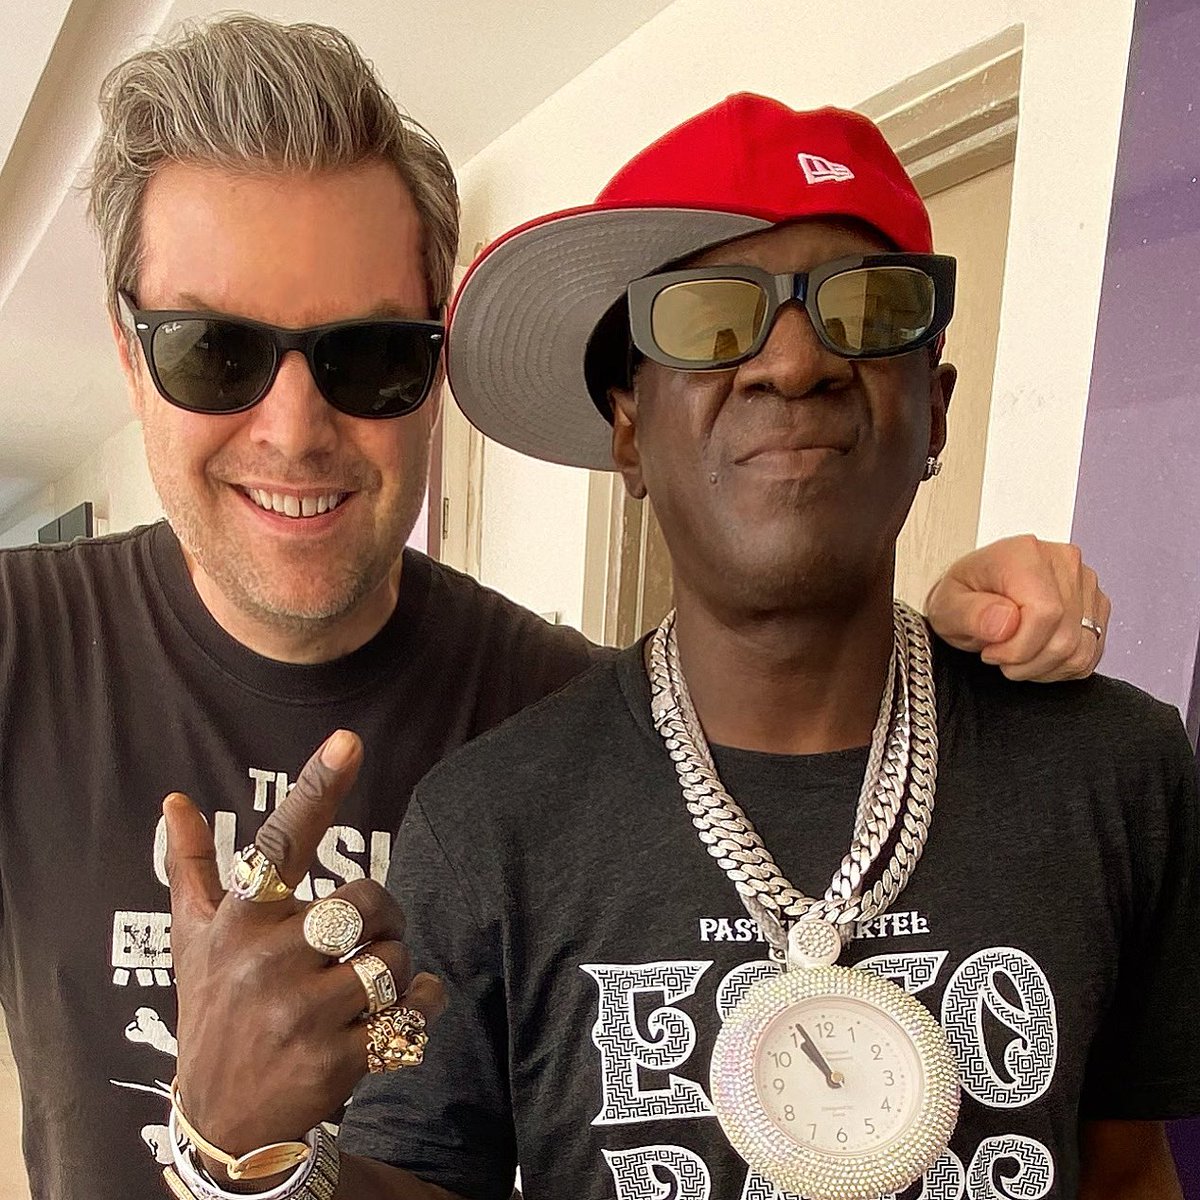 If you would’ve told 14-year-old skateboarding, Public Enemy-worshipping me that I would be doing an event with the legend that is @FlavorFlav one day, I would never have believed you!